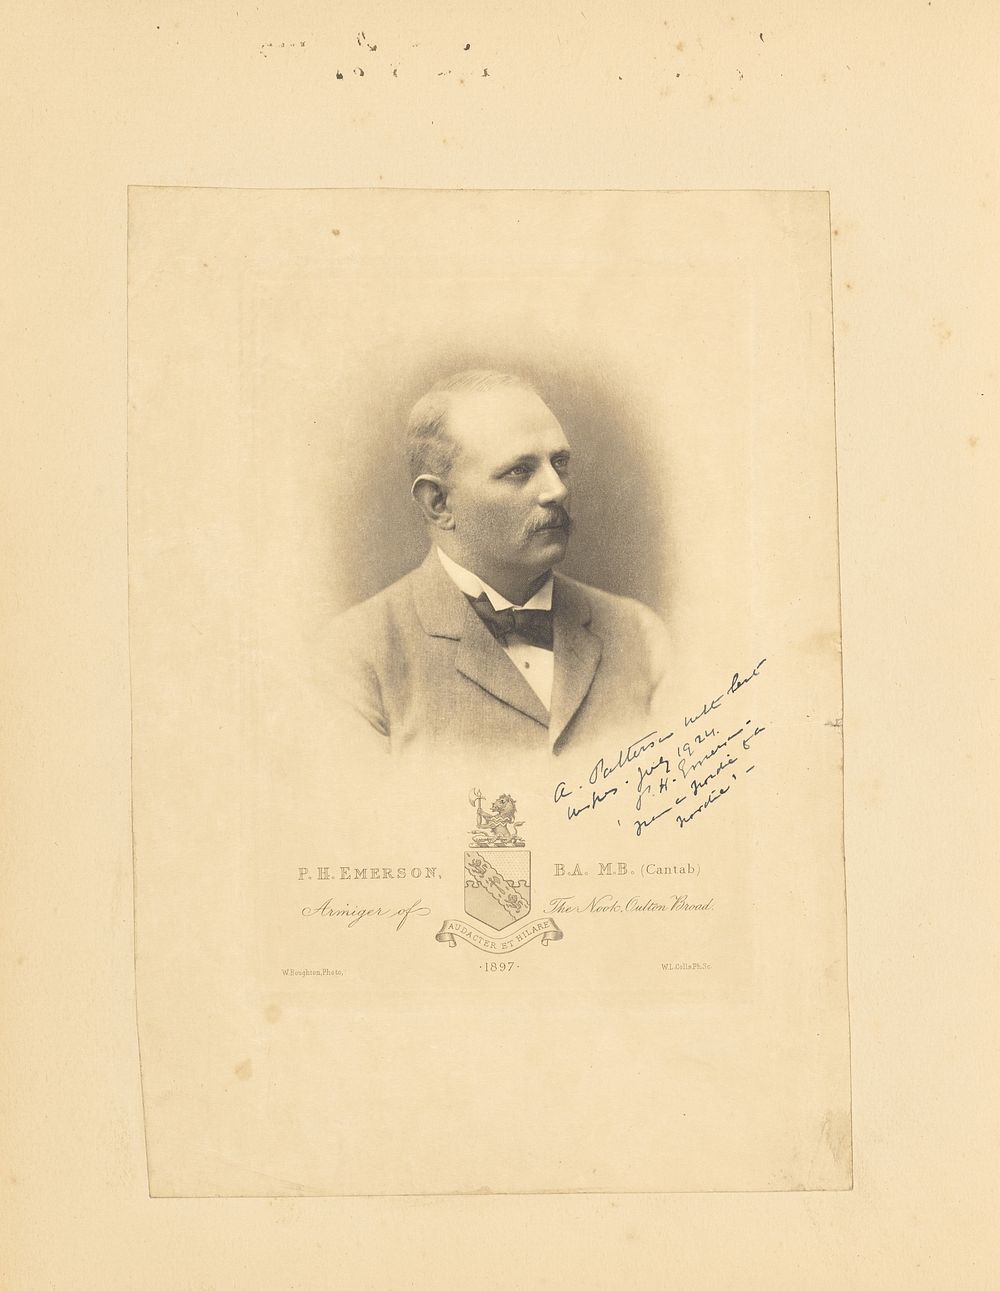 P.H. Emerson, B.A., M.B. (Cantab). Amiger of the Nook, Oulton Broad by W Boughton